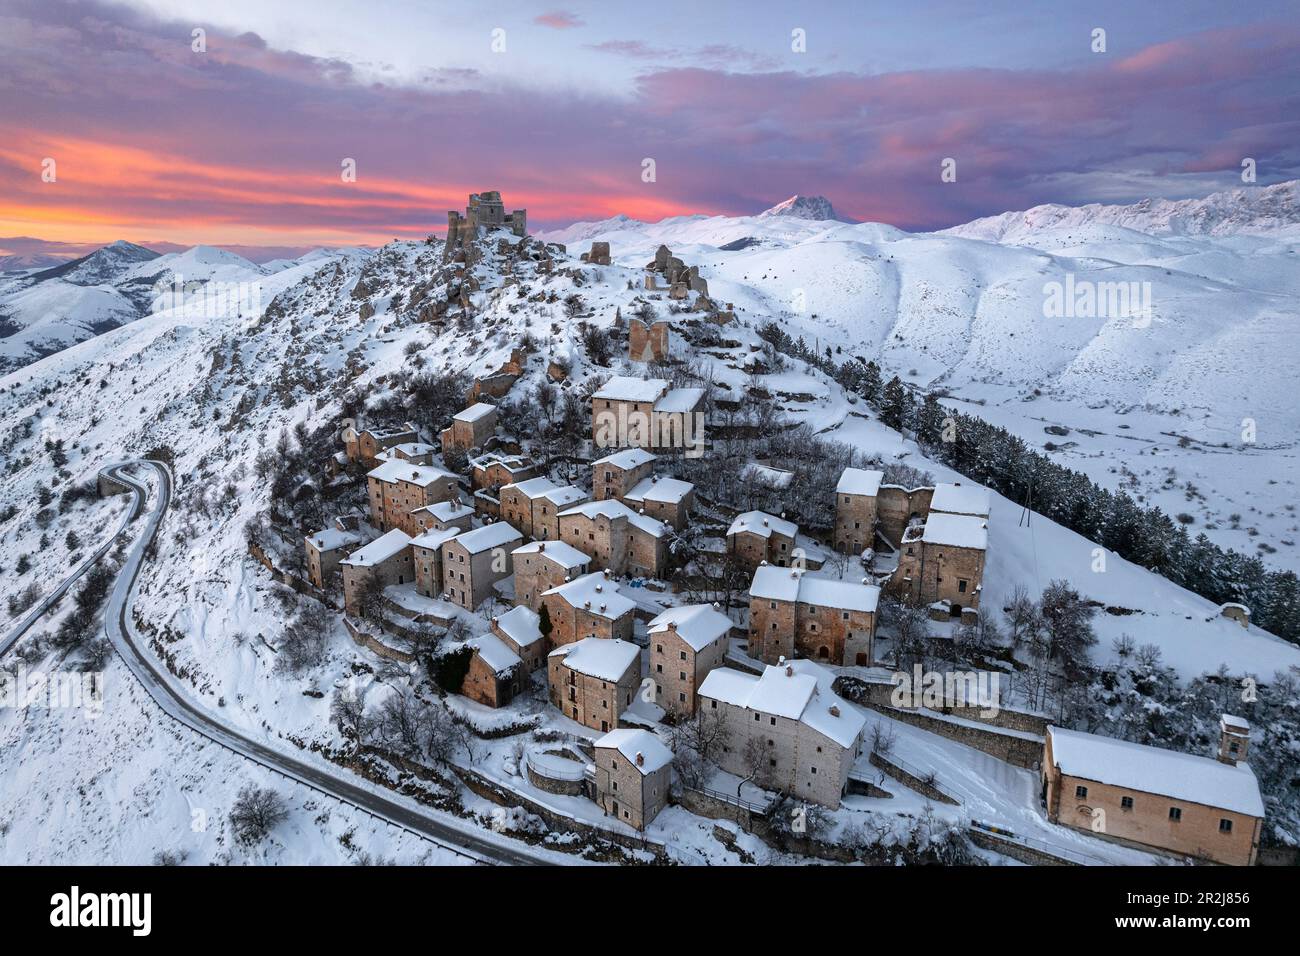 Aerial winter view of the snow covered medieval village of Rocca Calascio with the castle and pink clouds at dusk Stock Photo